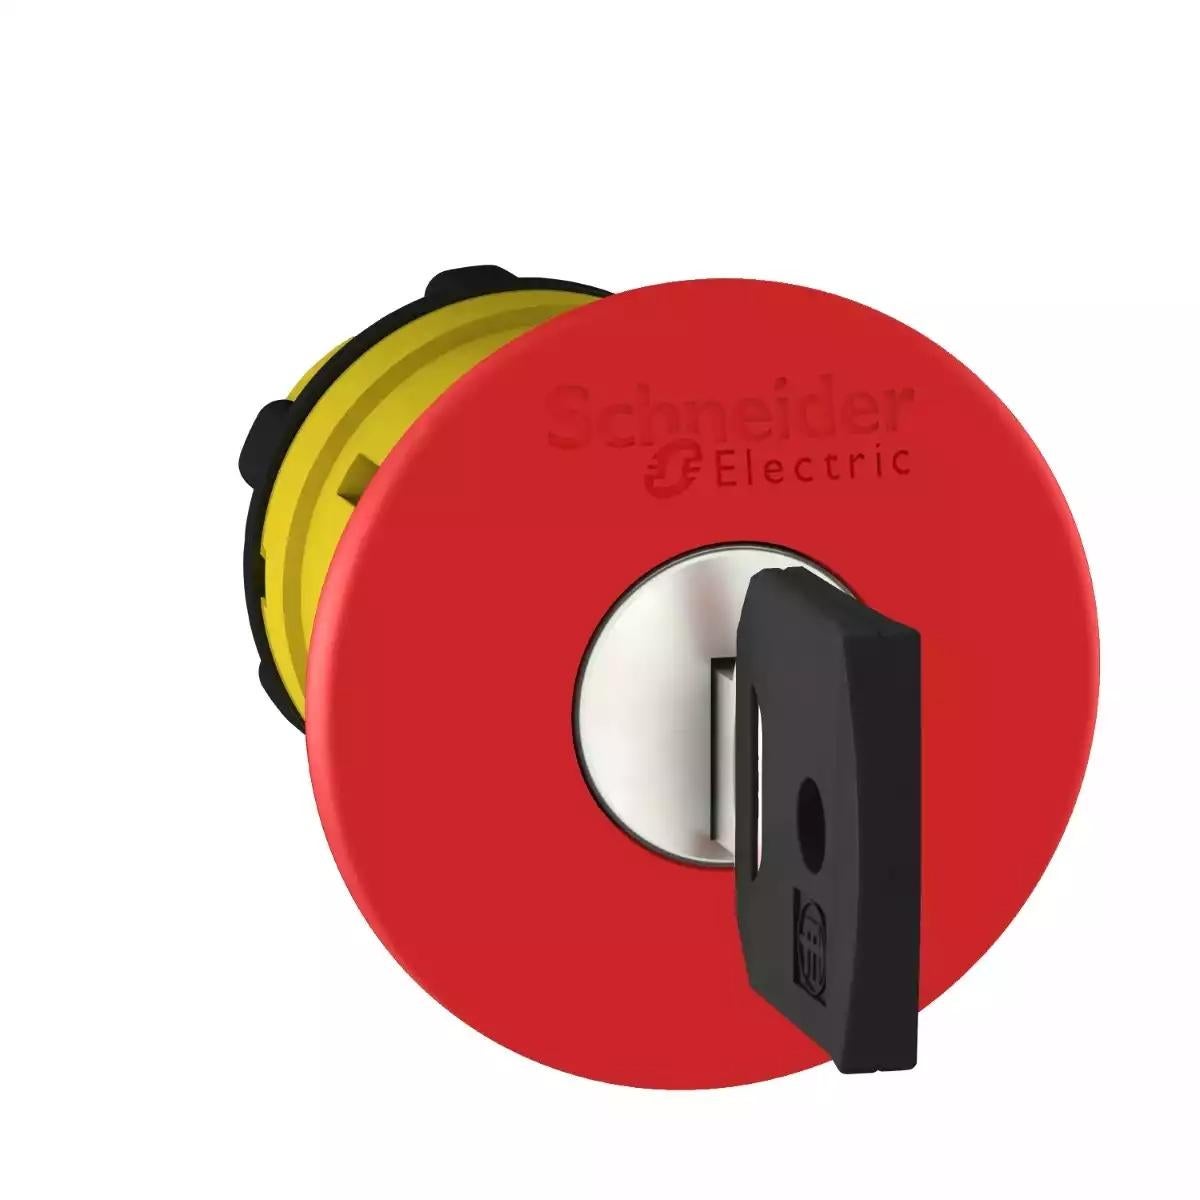 red Ø40 Emergency stop, switching off head Ø22 trigger and latching key release